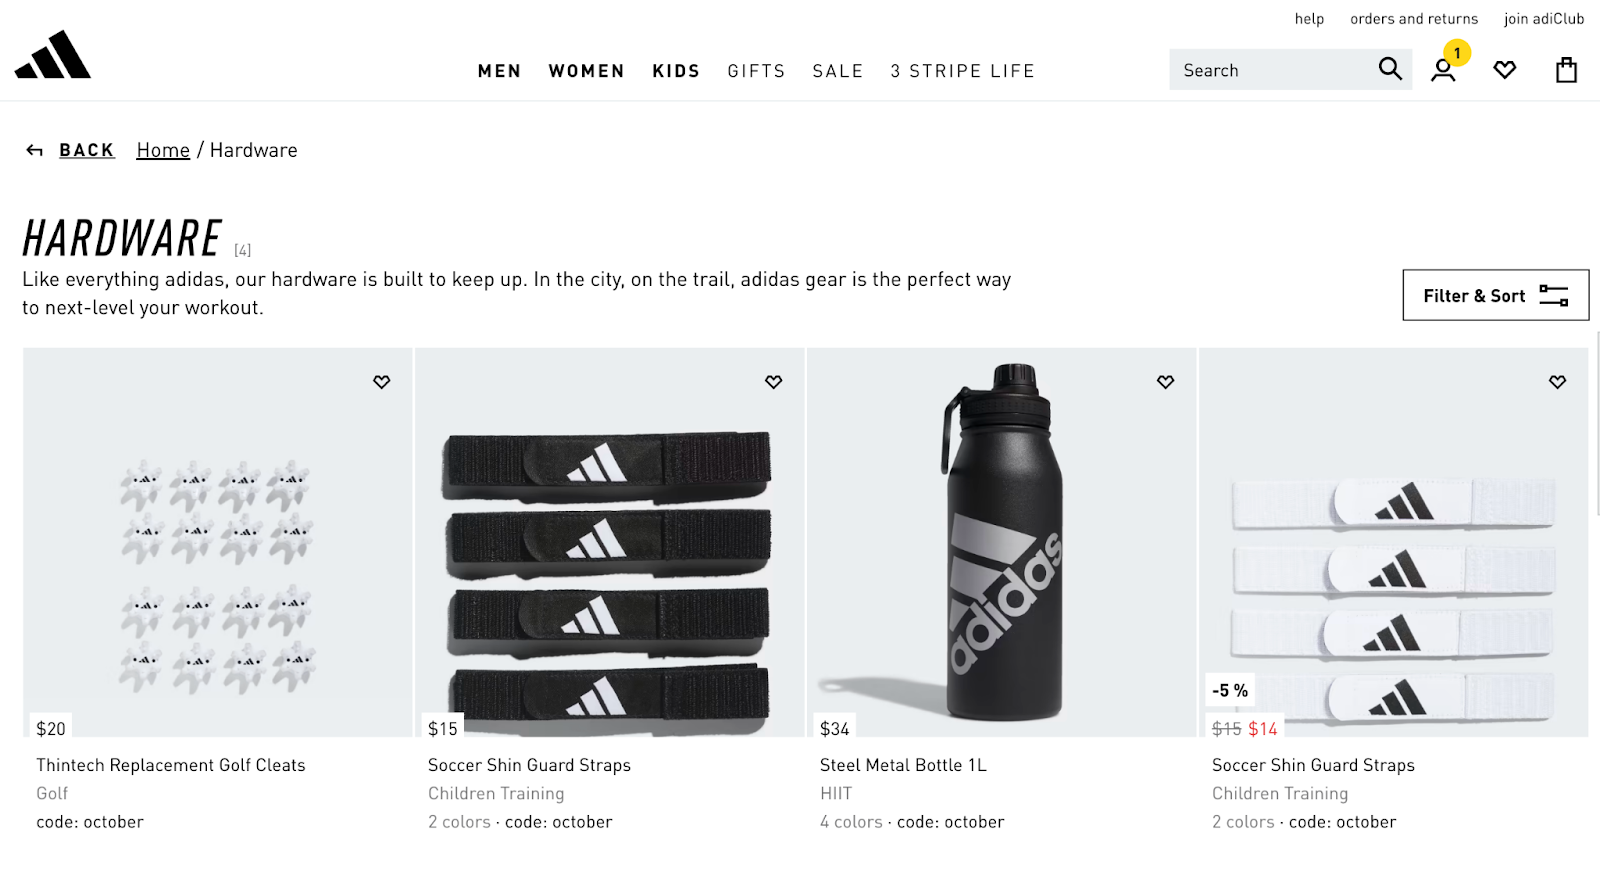 Adidas hardware collection page